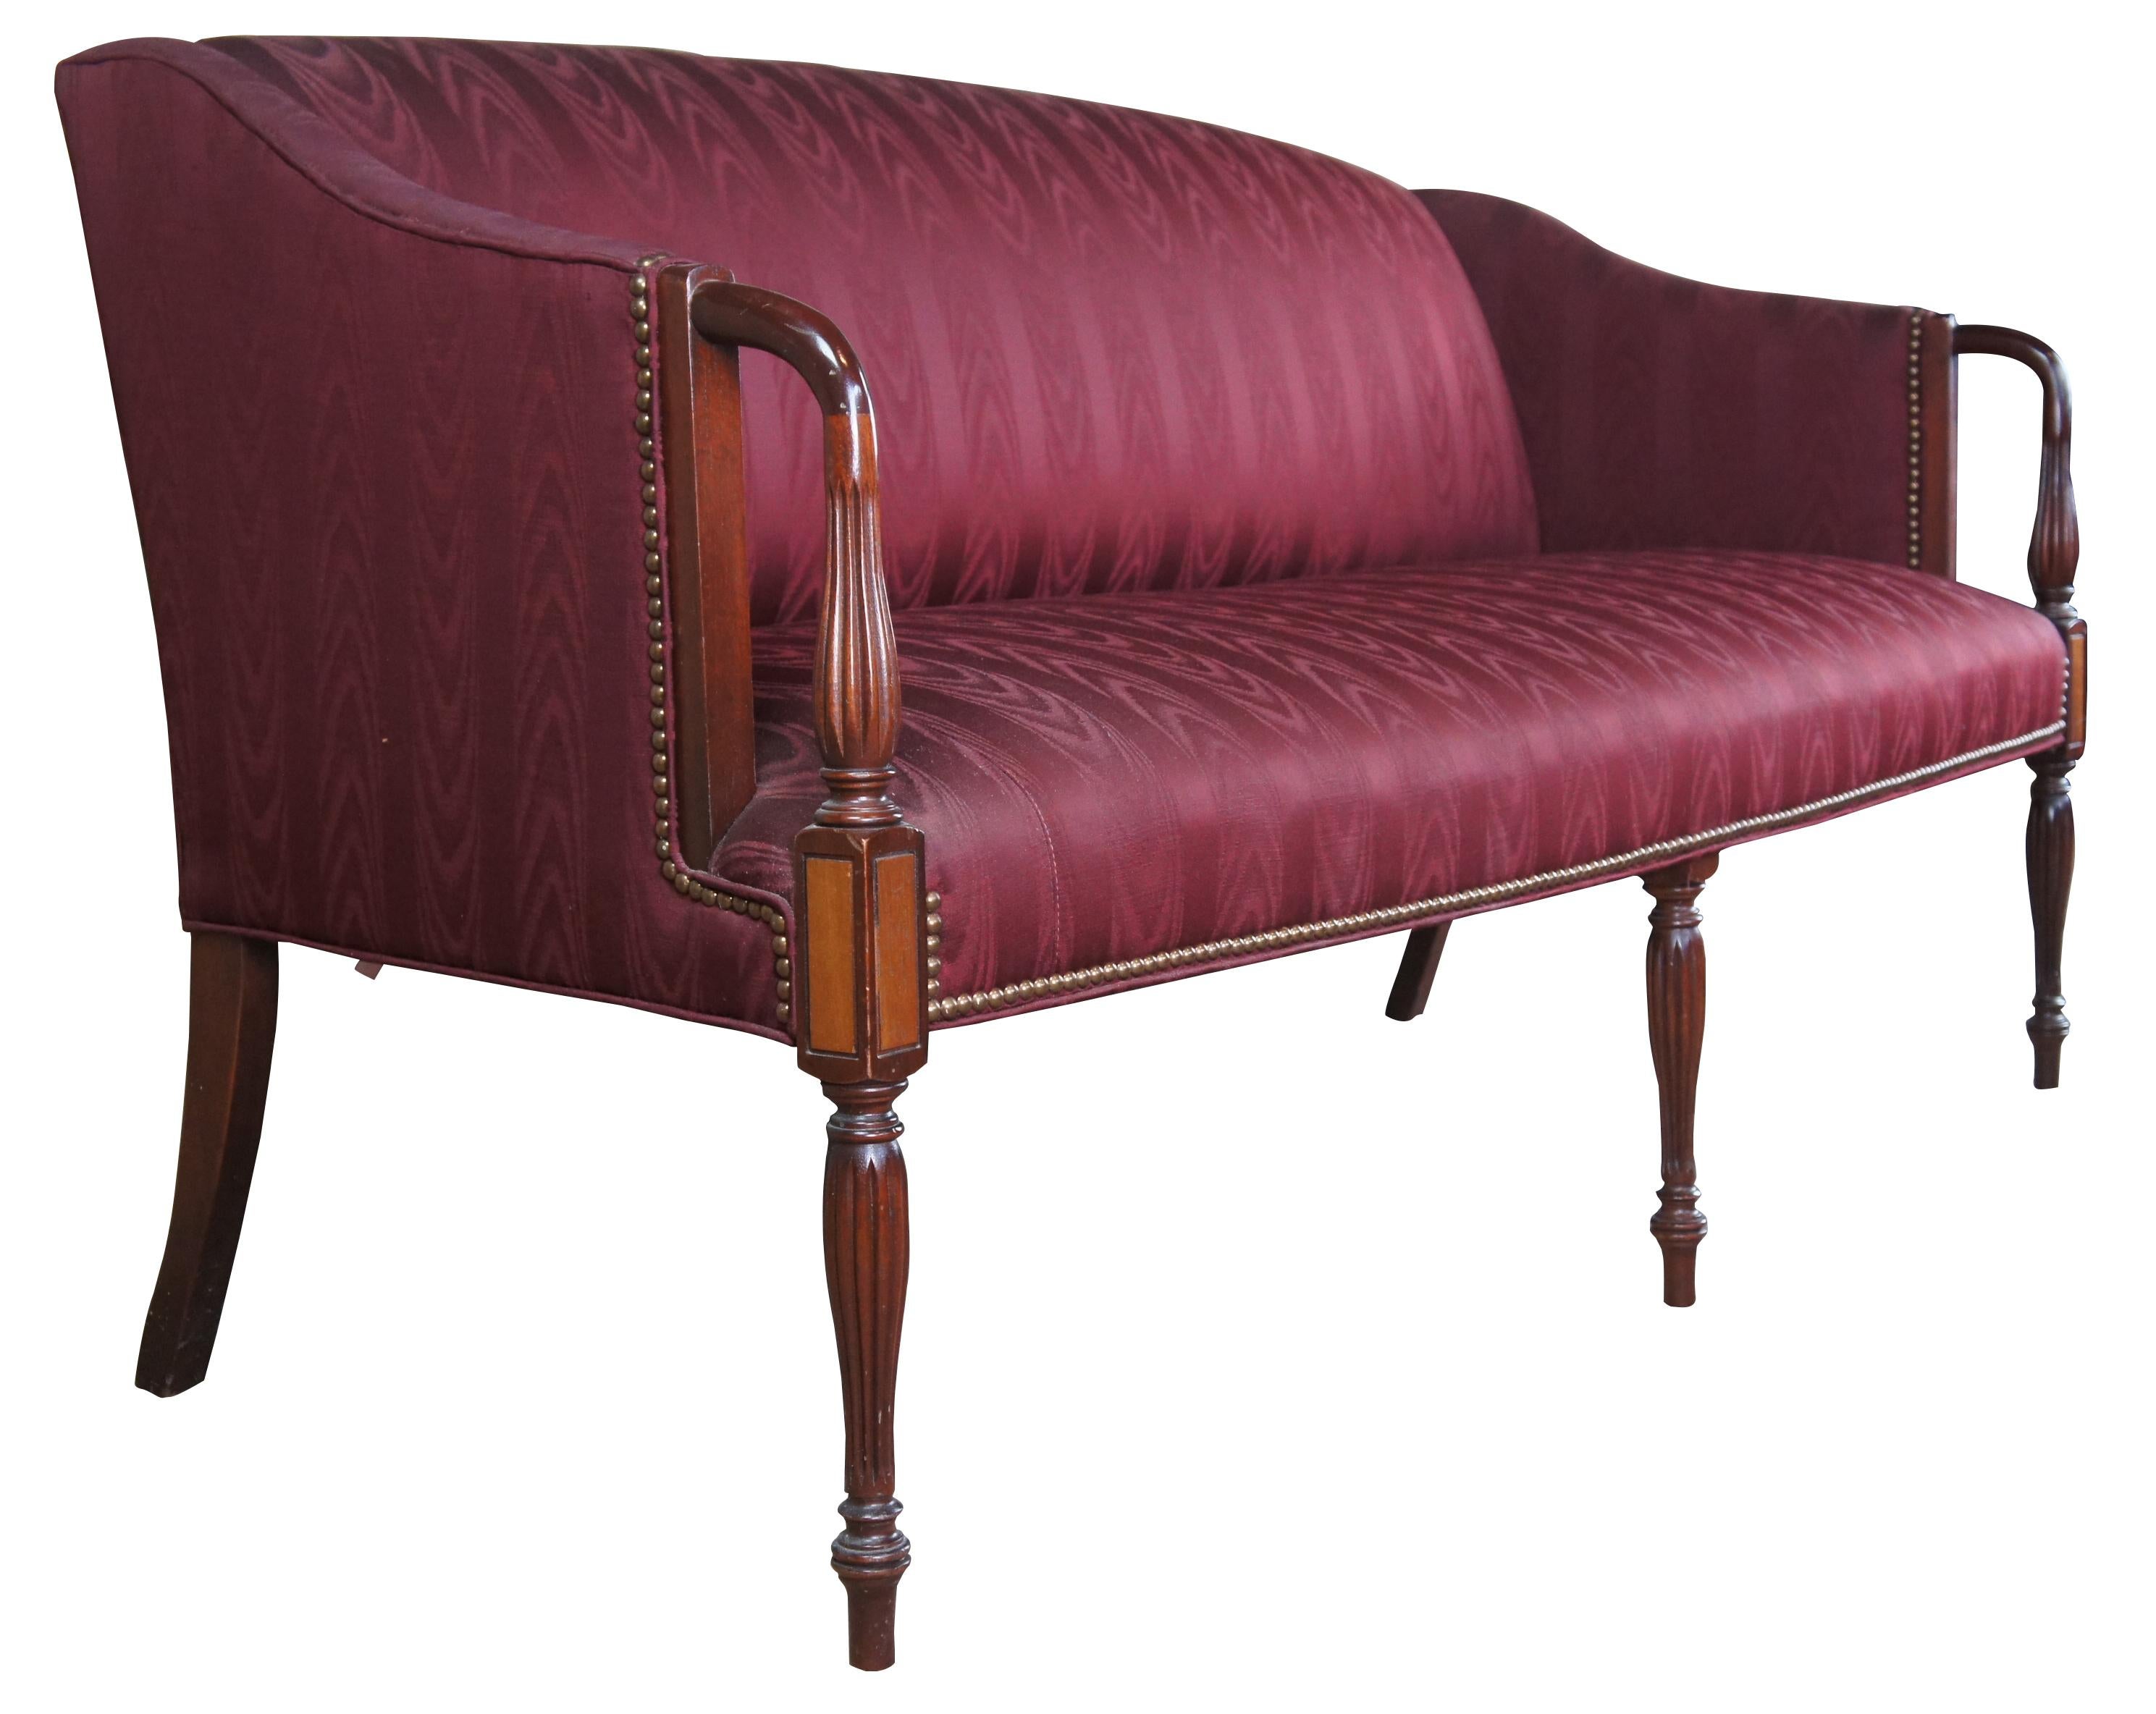 Antique Sheraton style bow back parlor sofa or settee. Made of mahogany featuring an arched back with red silk upholstery, nailhead trim, and ornate turned and reeded legs with arrow feet. Includes smooth open arms leading to elegantly banded